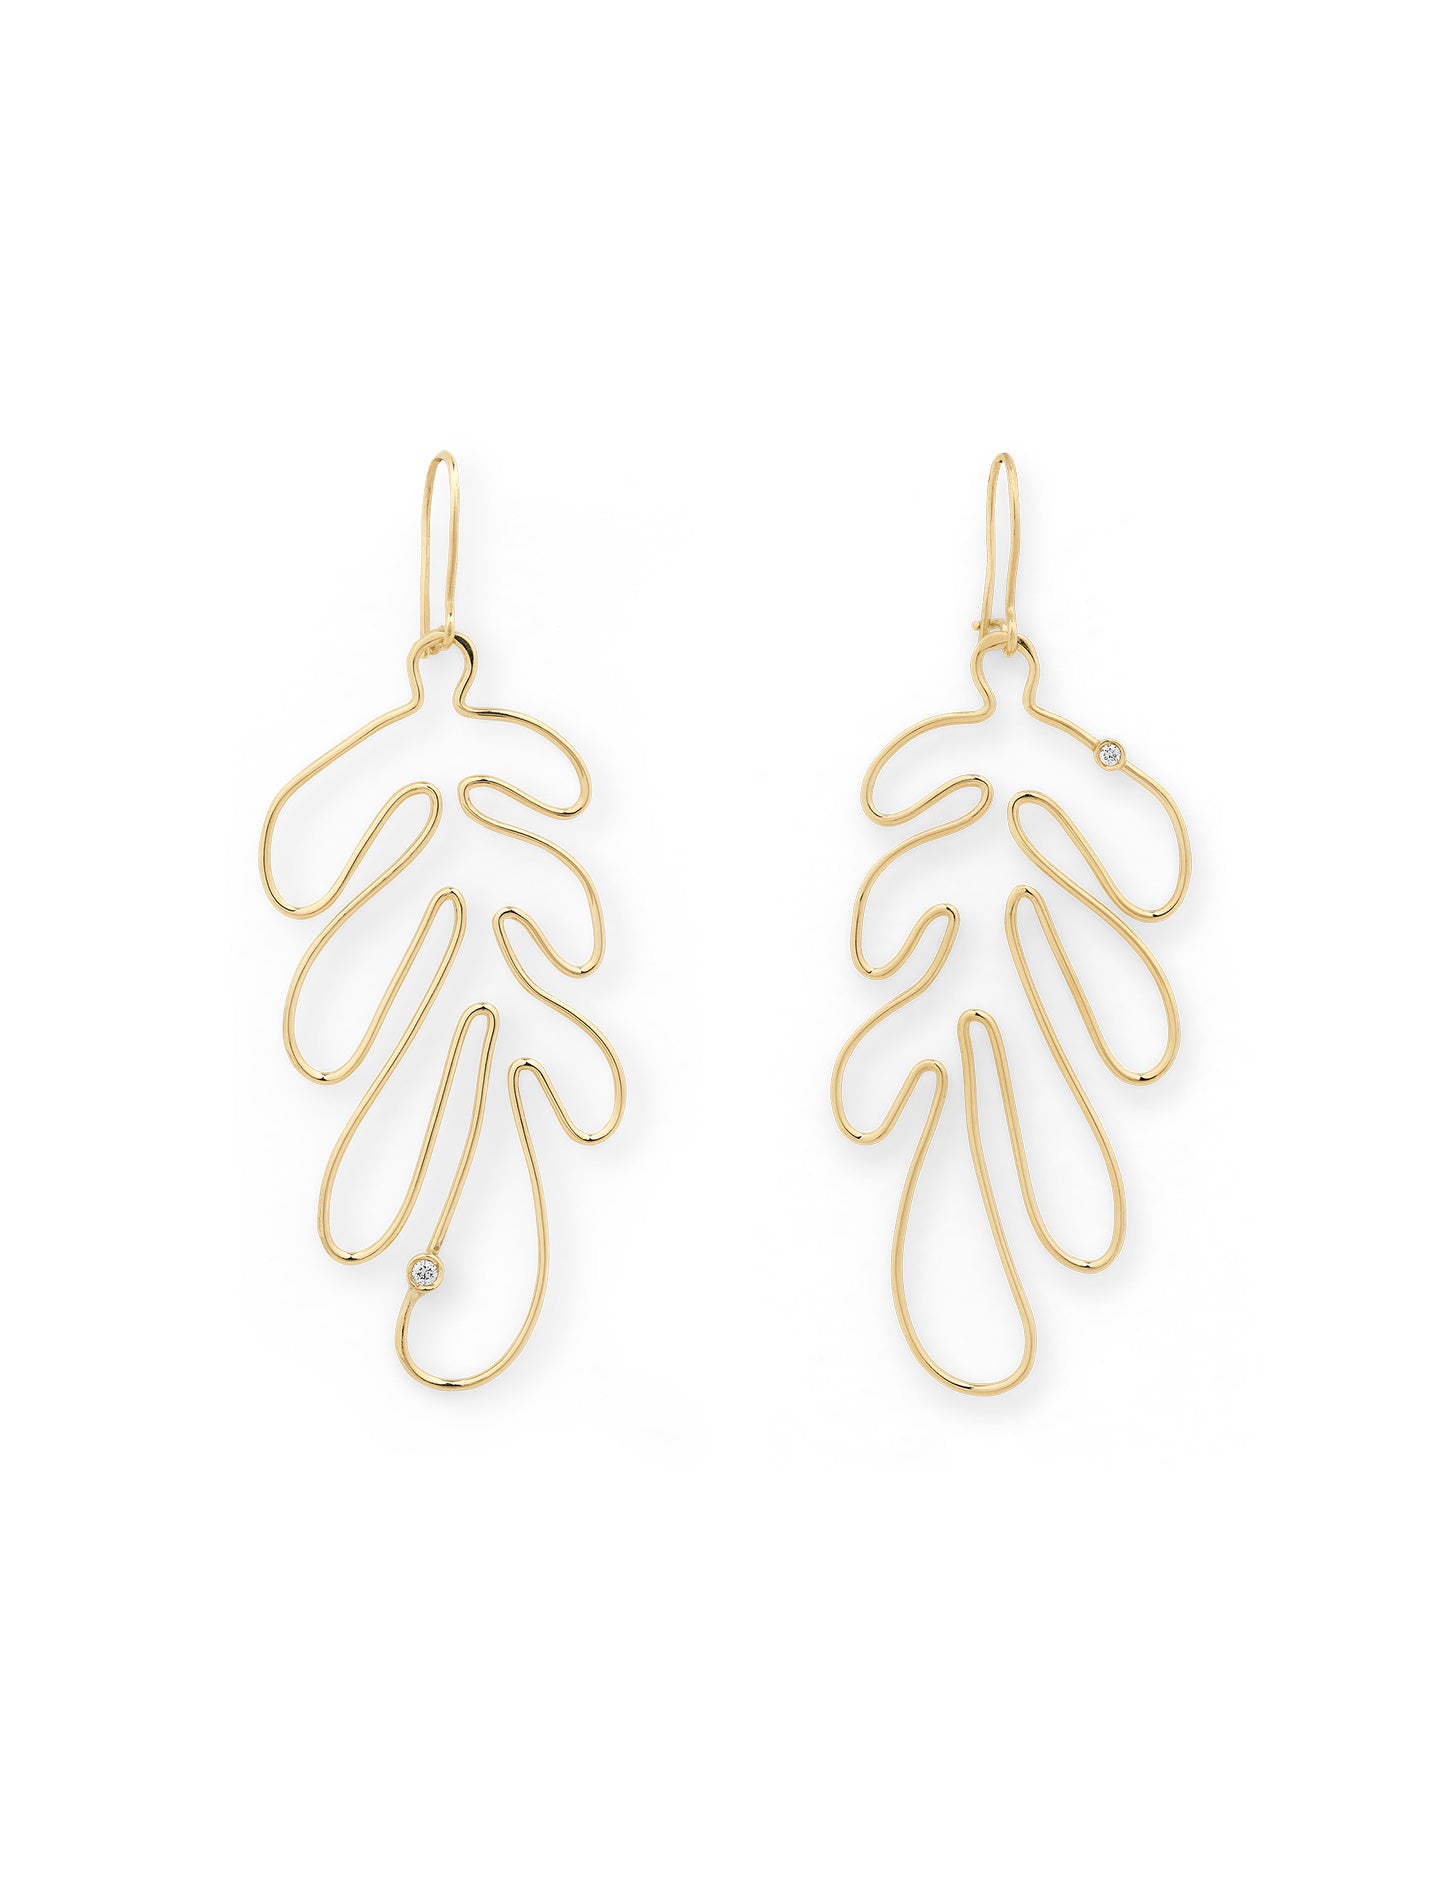 Matisse - earring and pendant in one